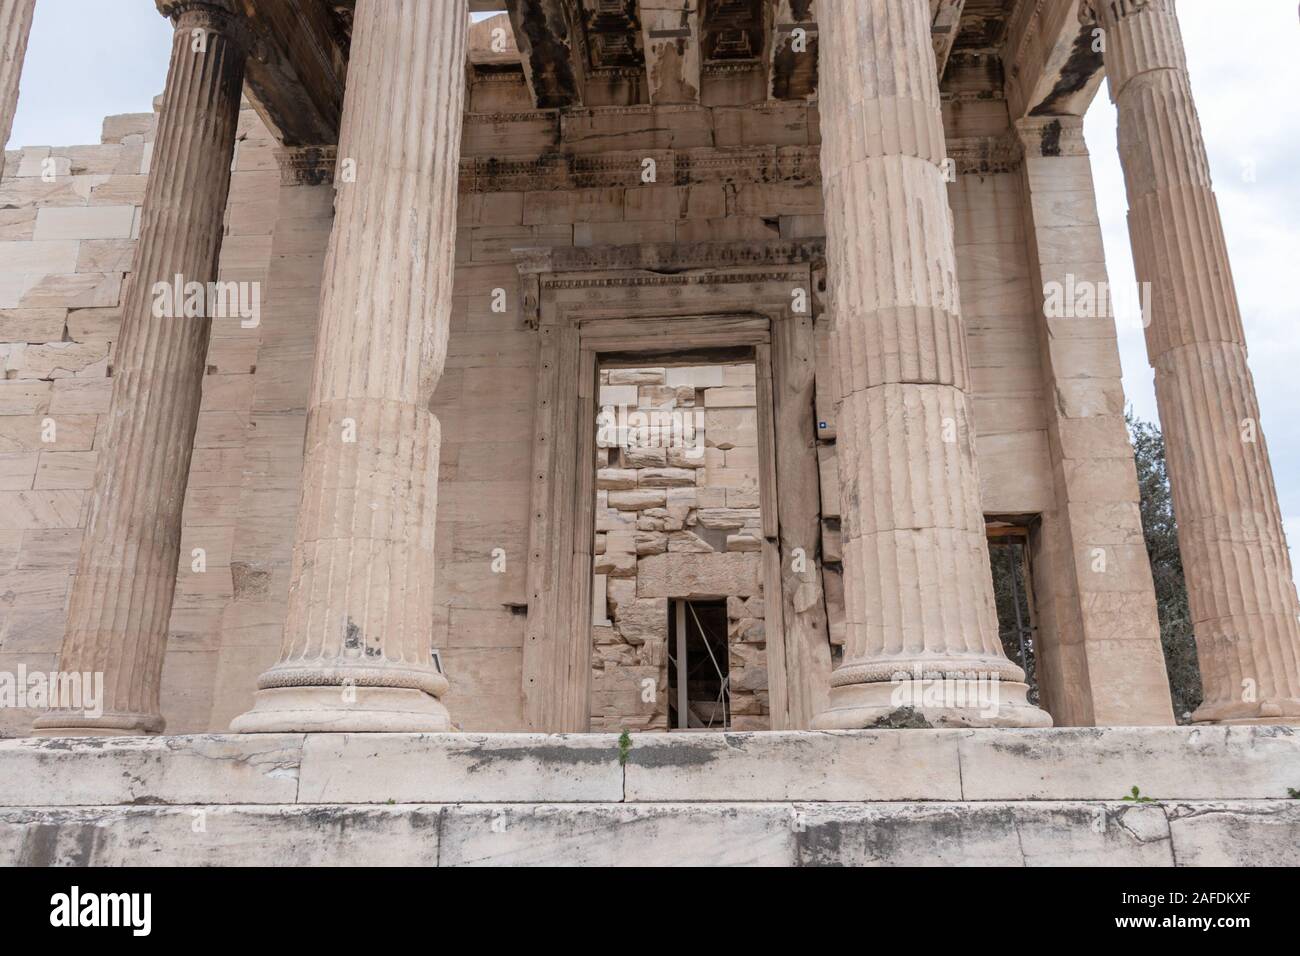 Erechtheion or Erechtheum ancient Greek temple on the north side of the Acropolis of Athens in Greece dedicated to Athena and Poseidon. Stock Photo